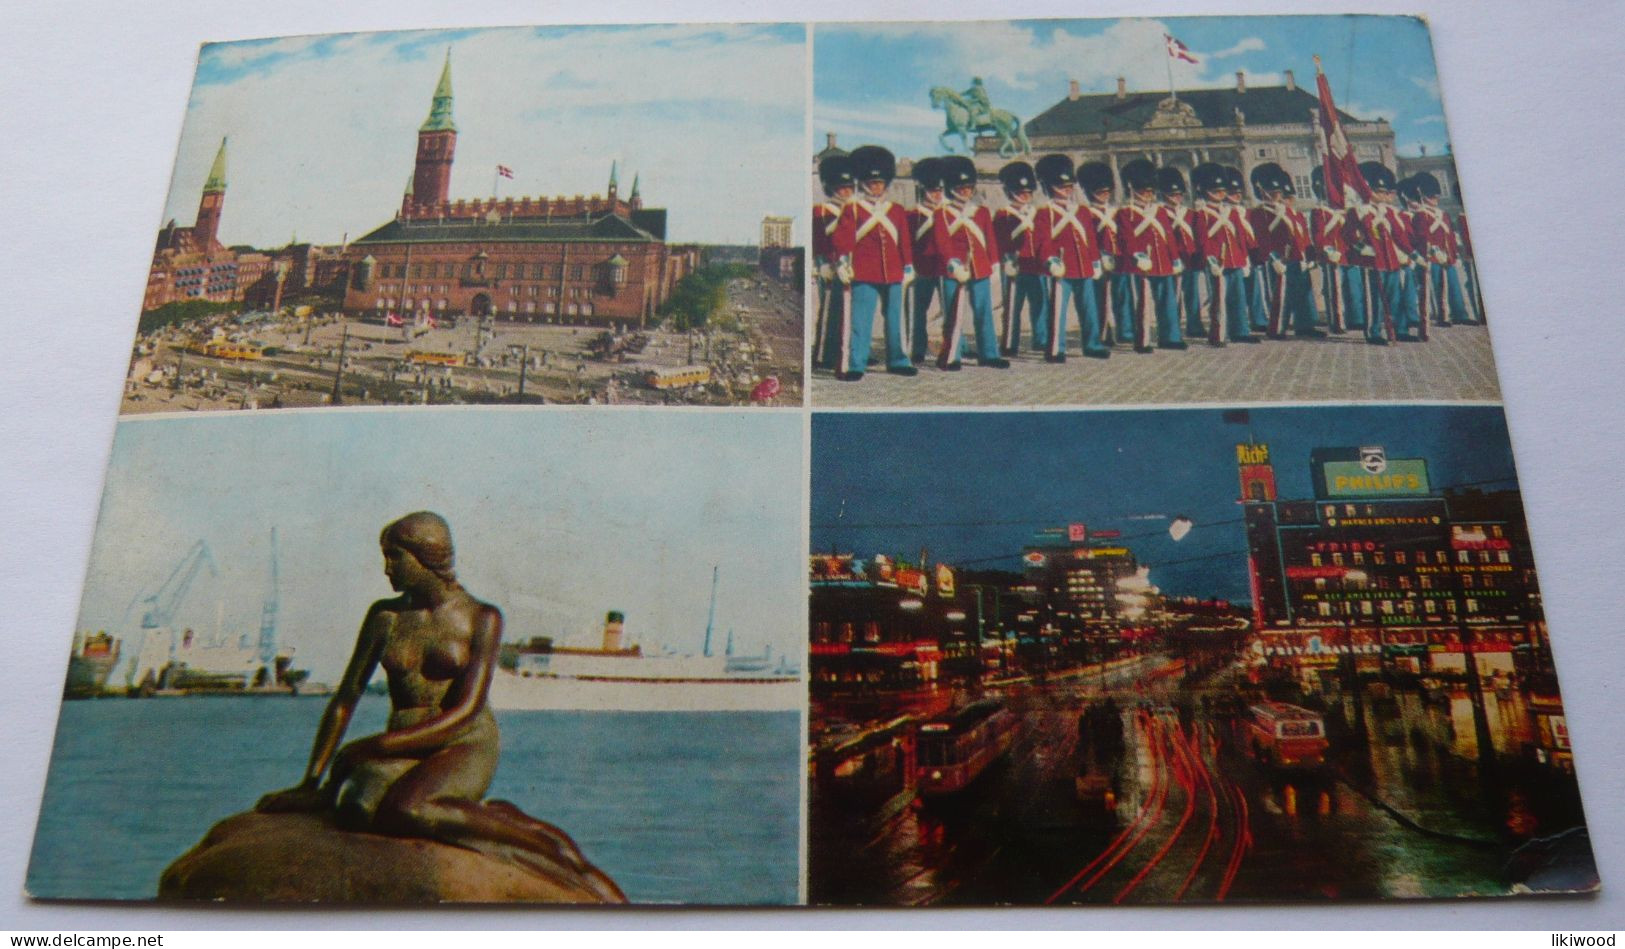 Copenhagen, København  - The City Hall Square By Day And Night, The Little Mermaid, The Royal Guard - Dänemark